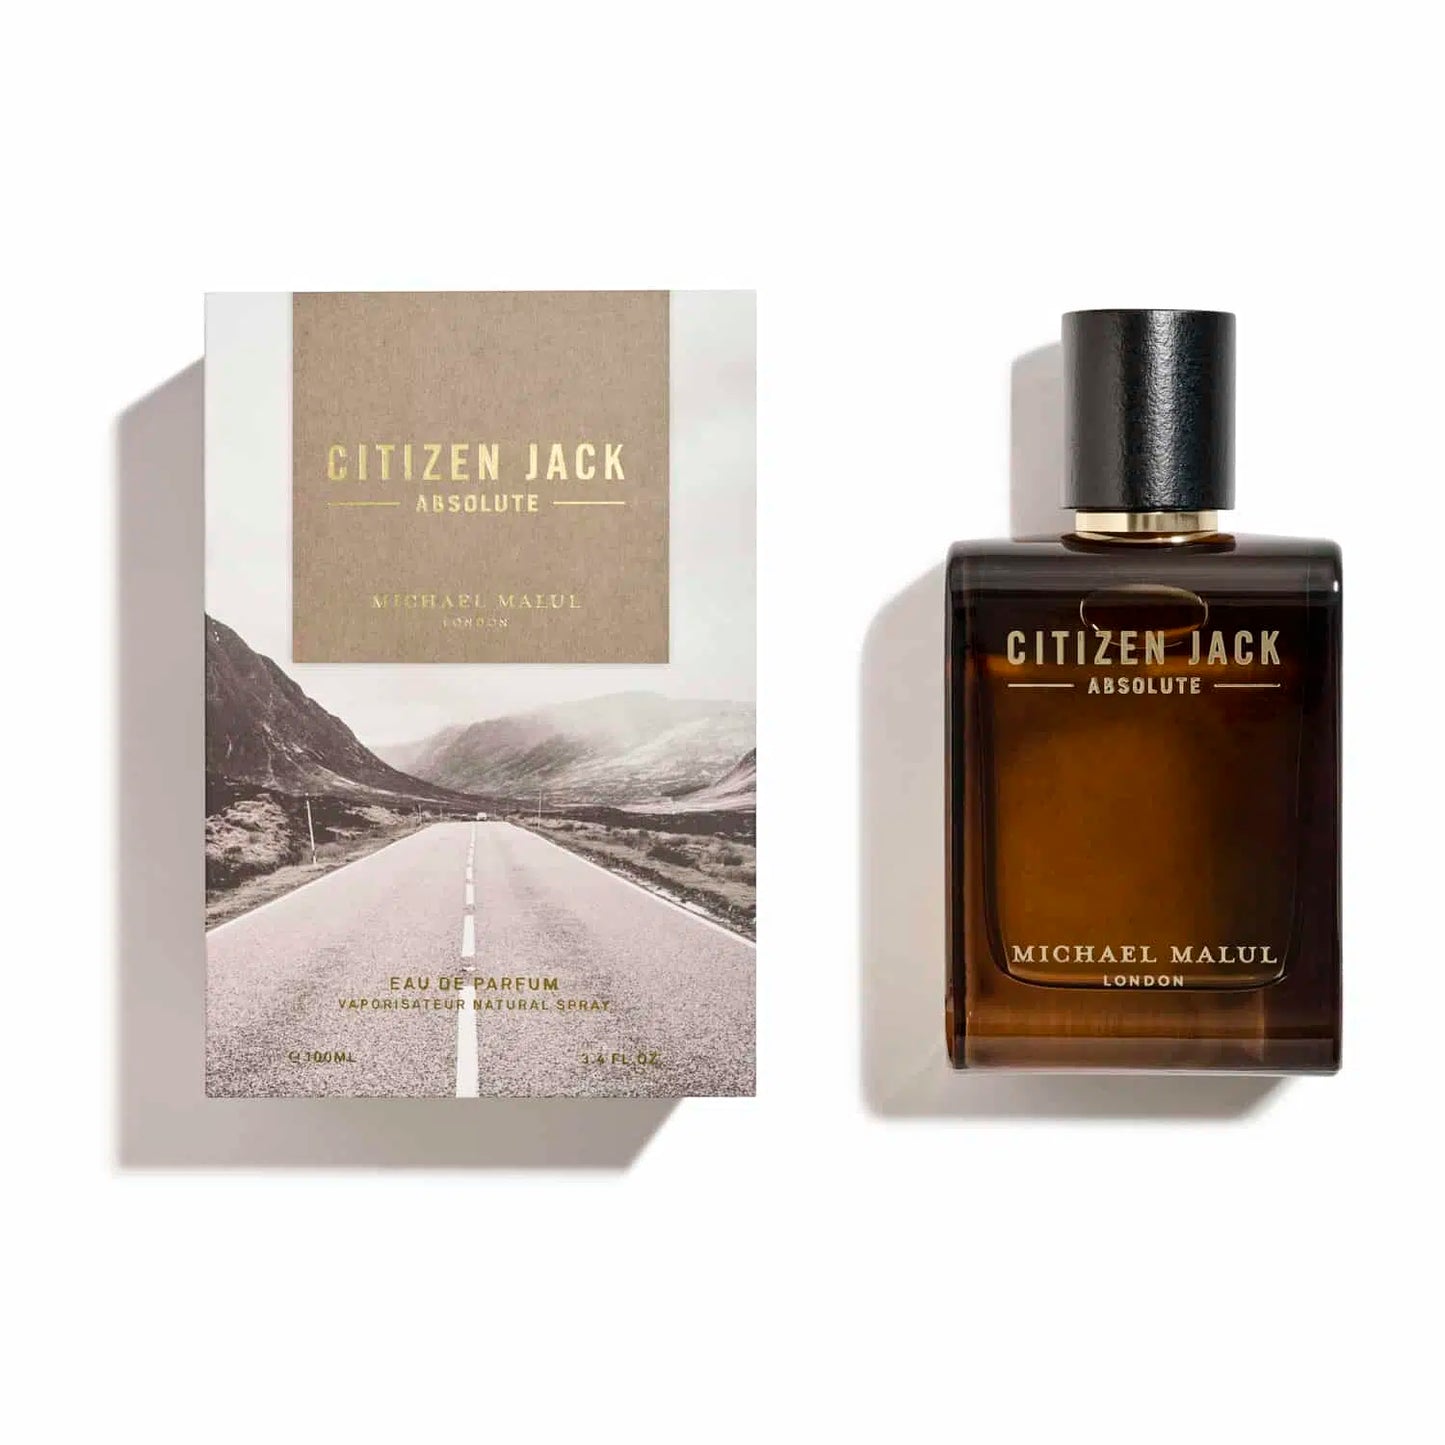 Citizen Jack Absolute by Michael Malul 3.4 oz For Men